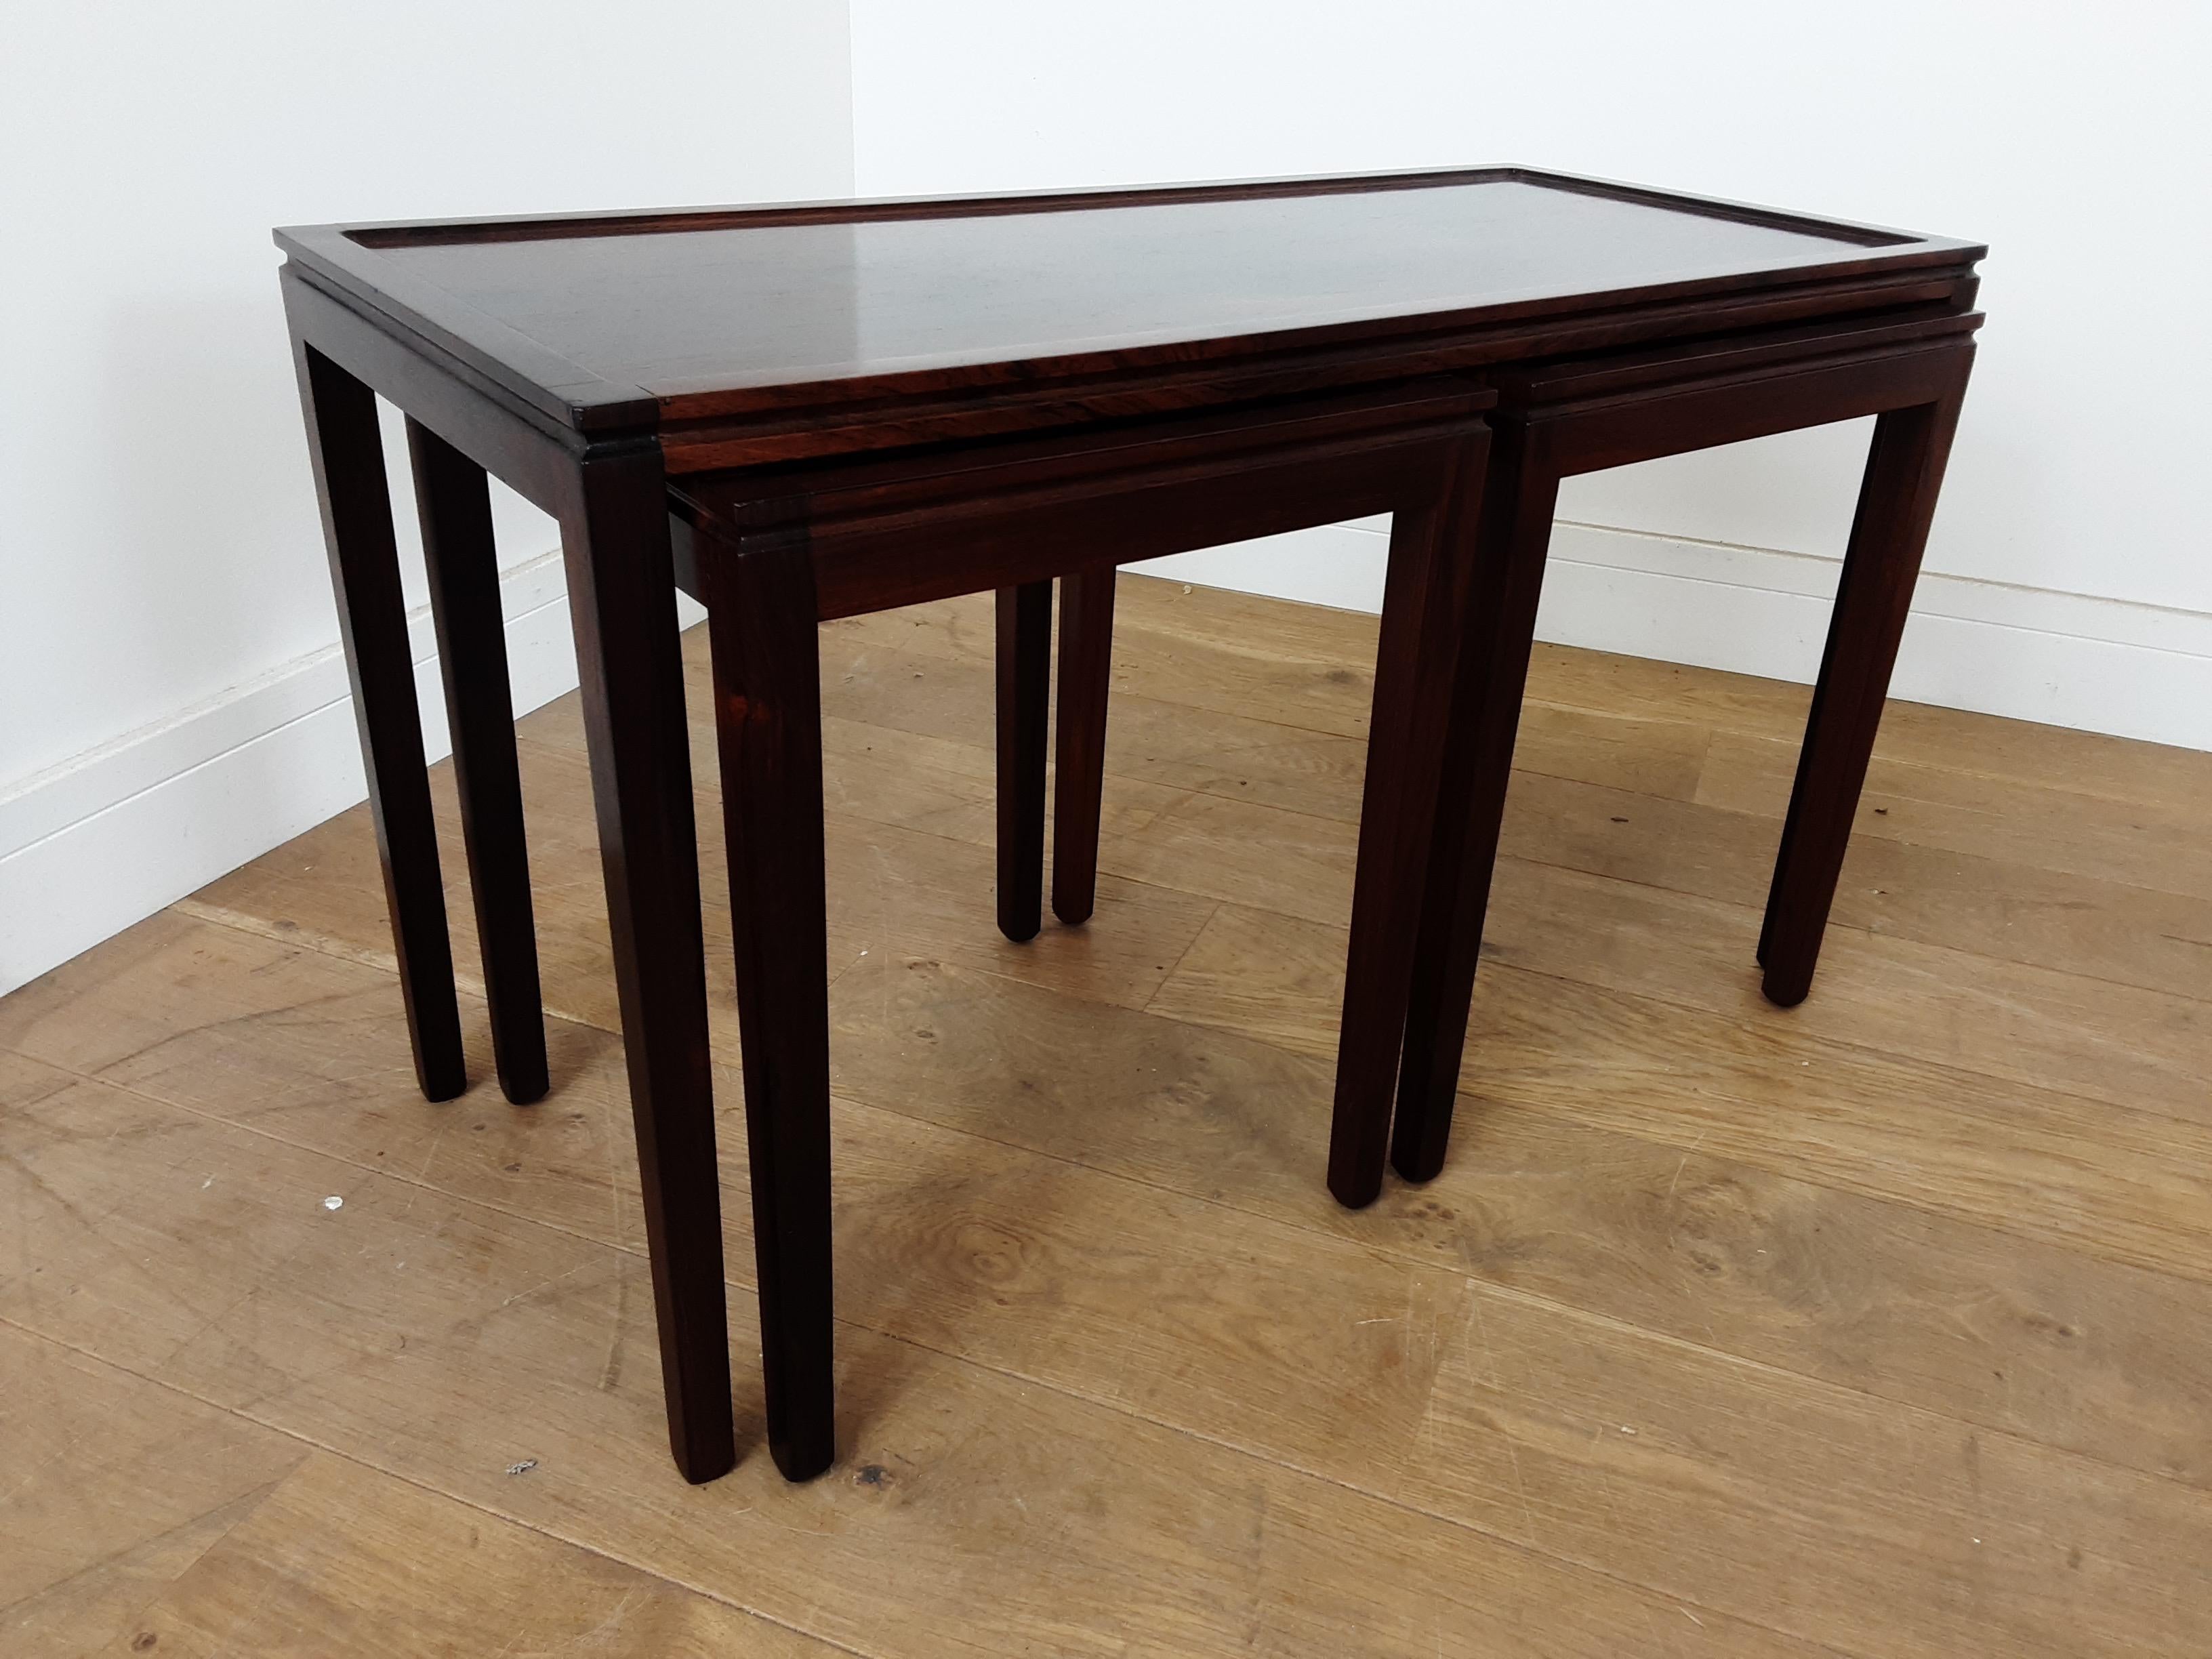 20th Century Midcentury Nest of Tables in Deep Brown Figured Rosewood circa 1960 from Denmark For Sale